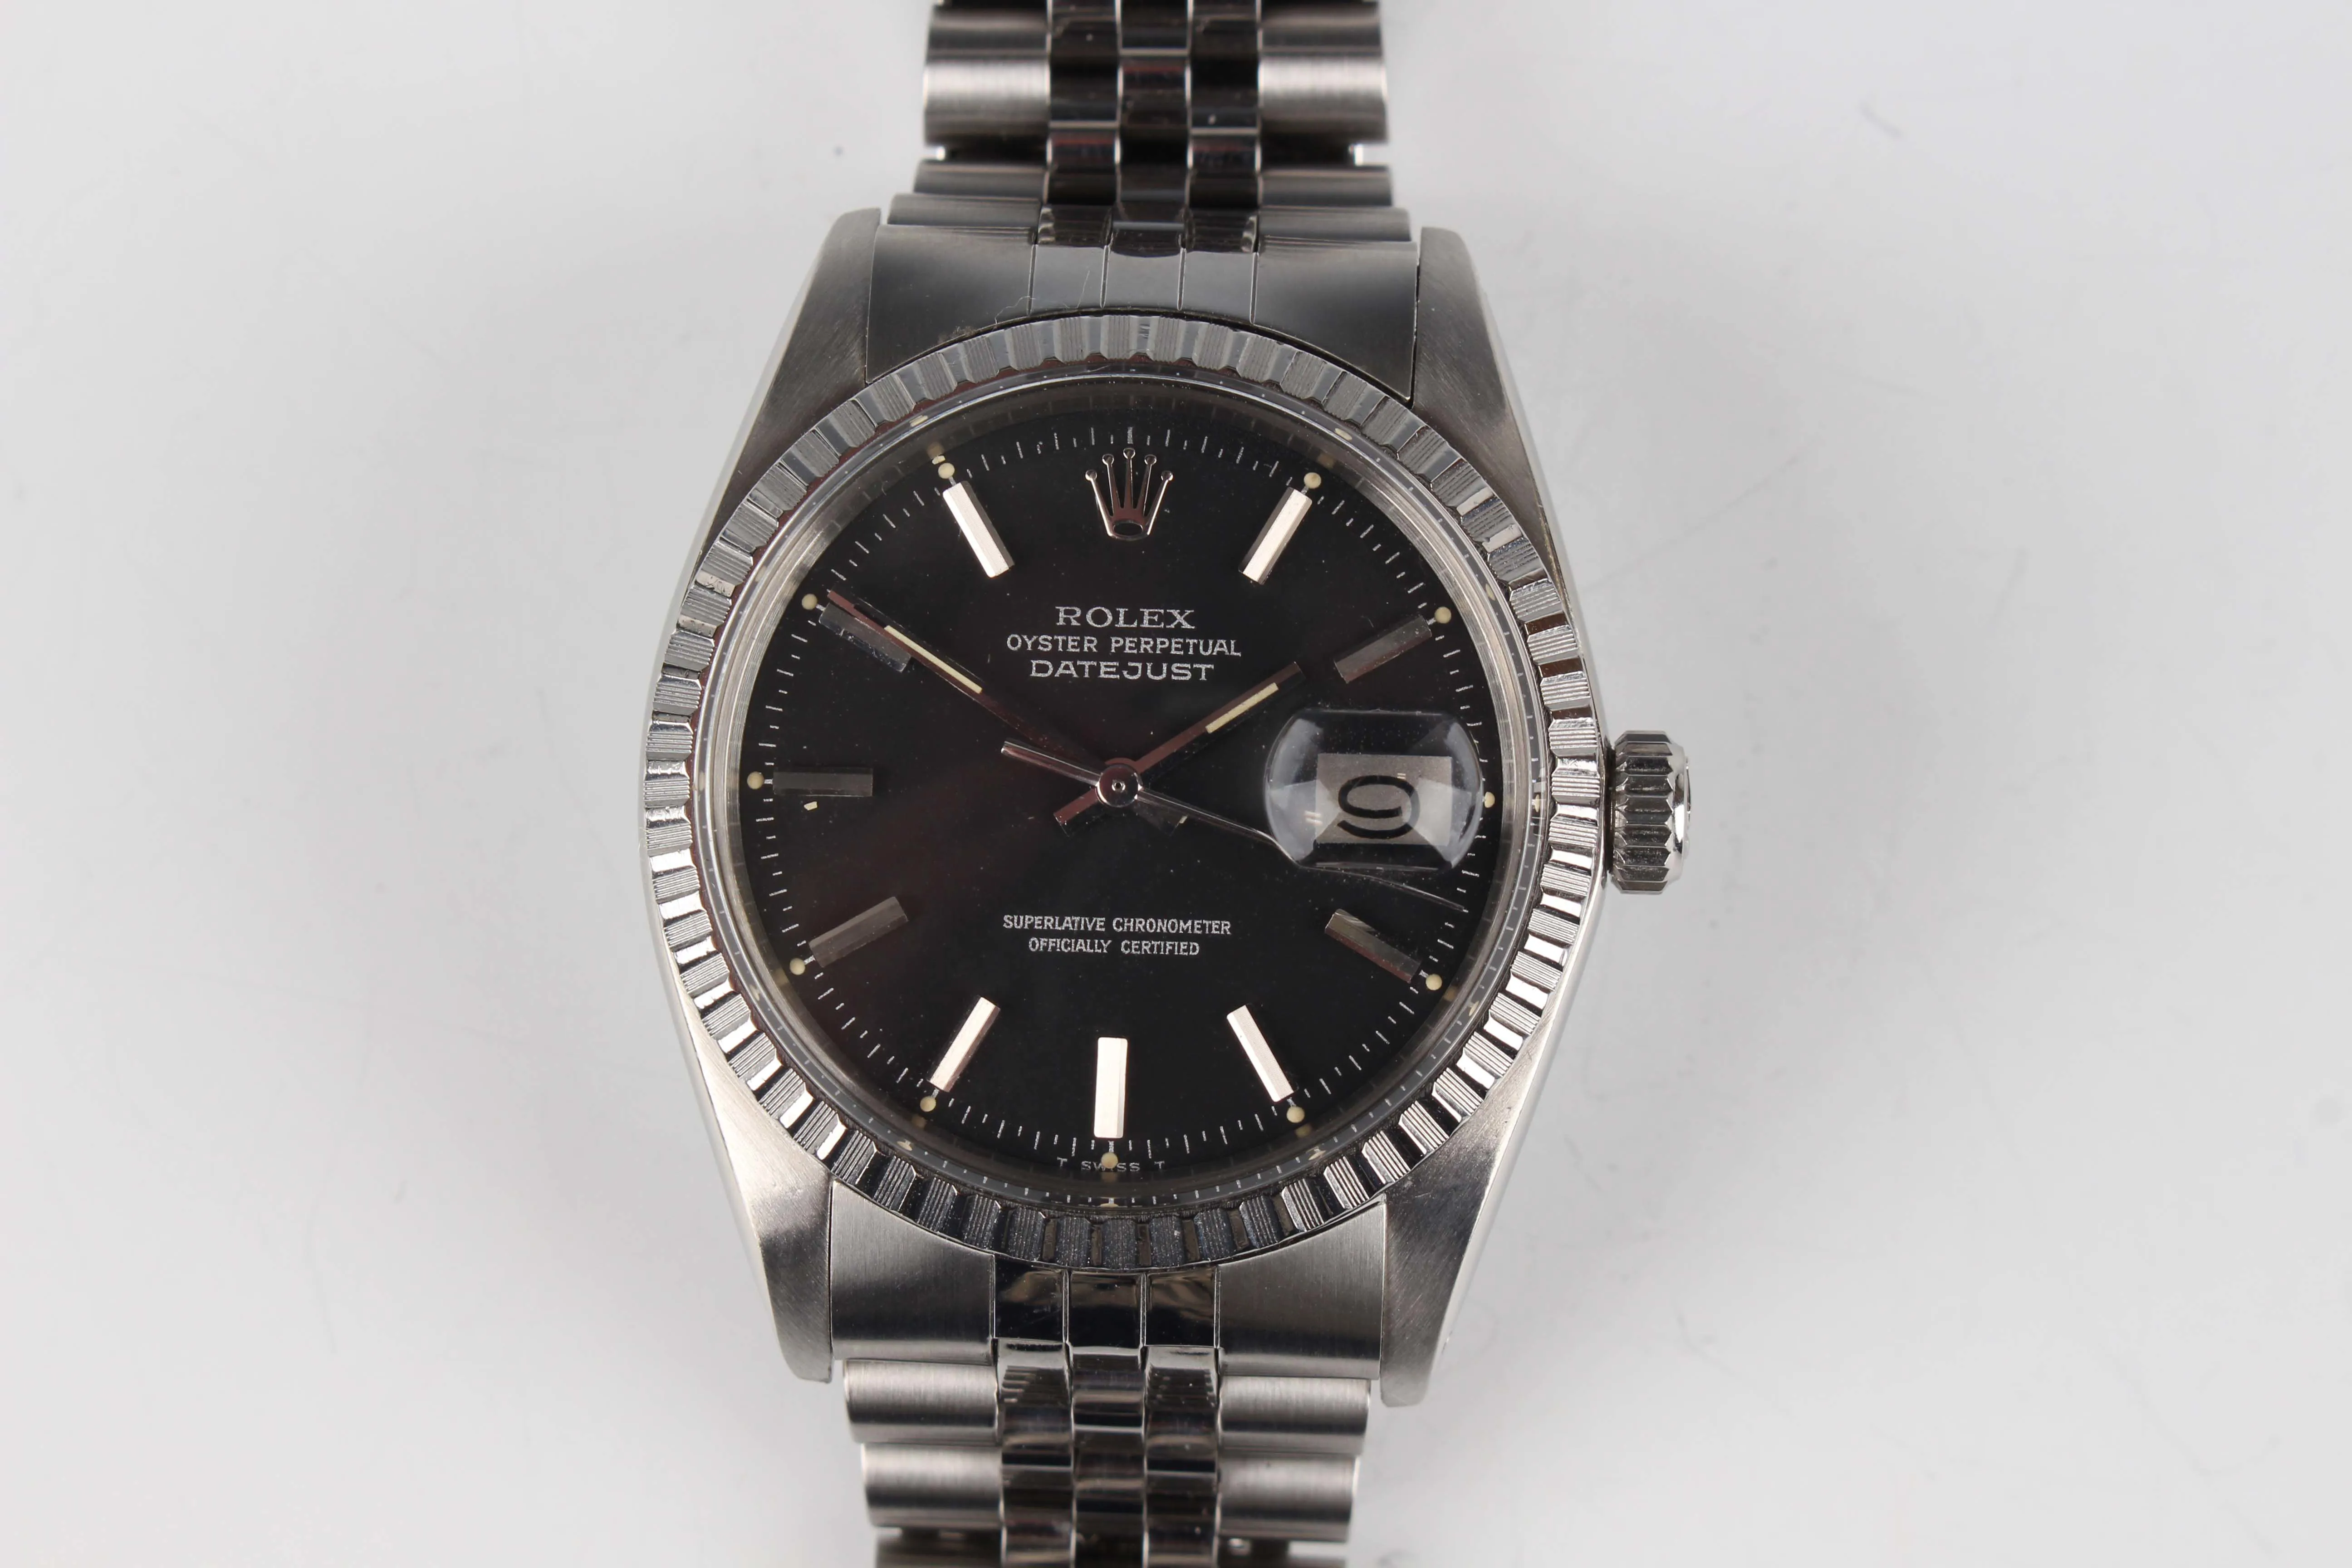 Rolex Oyster Perpetual "Datejust" 1603 nullmm